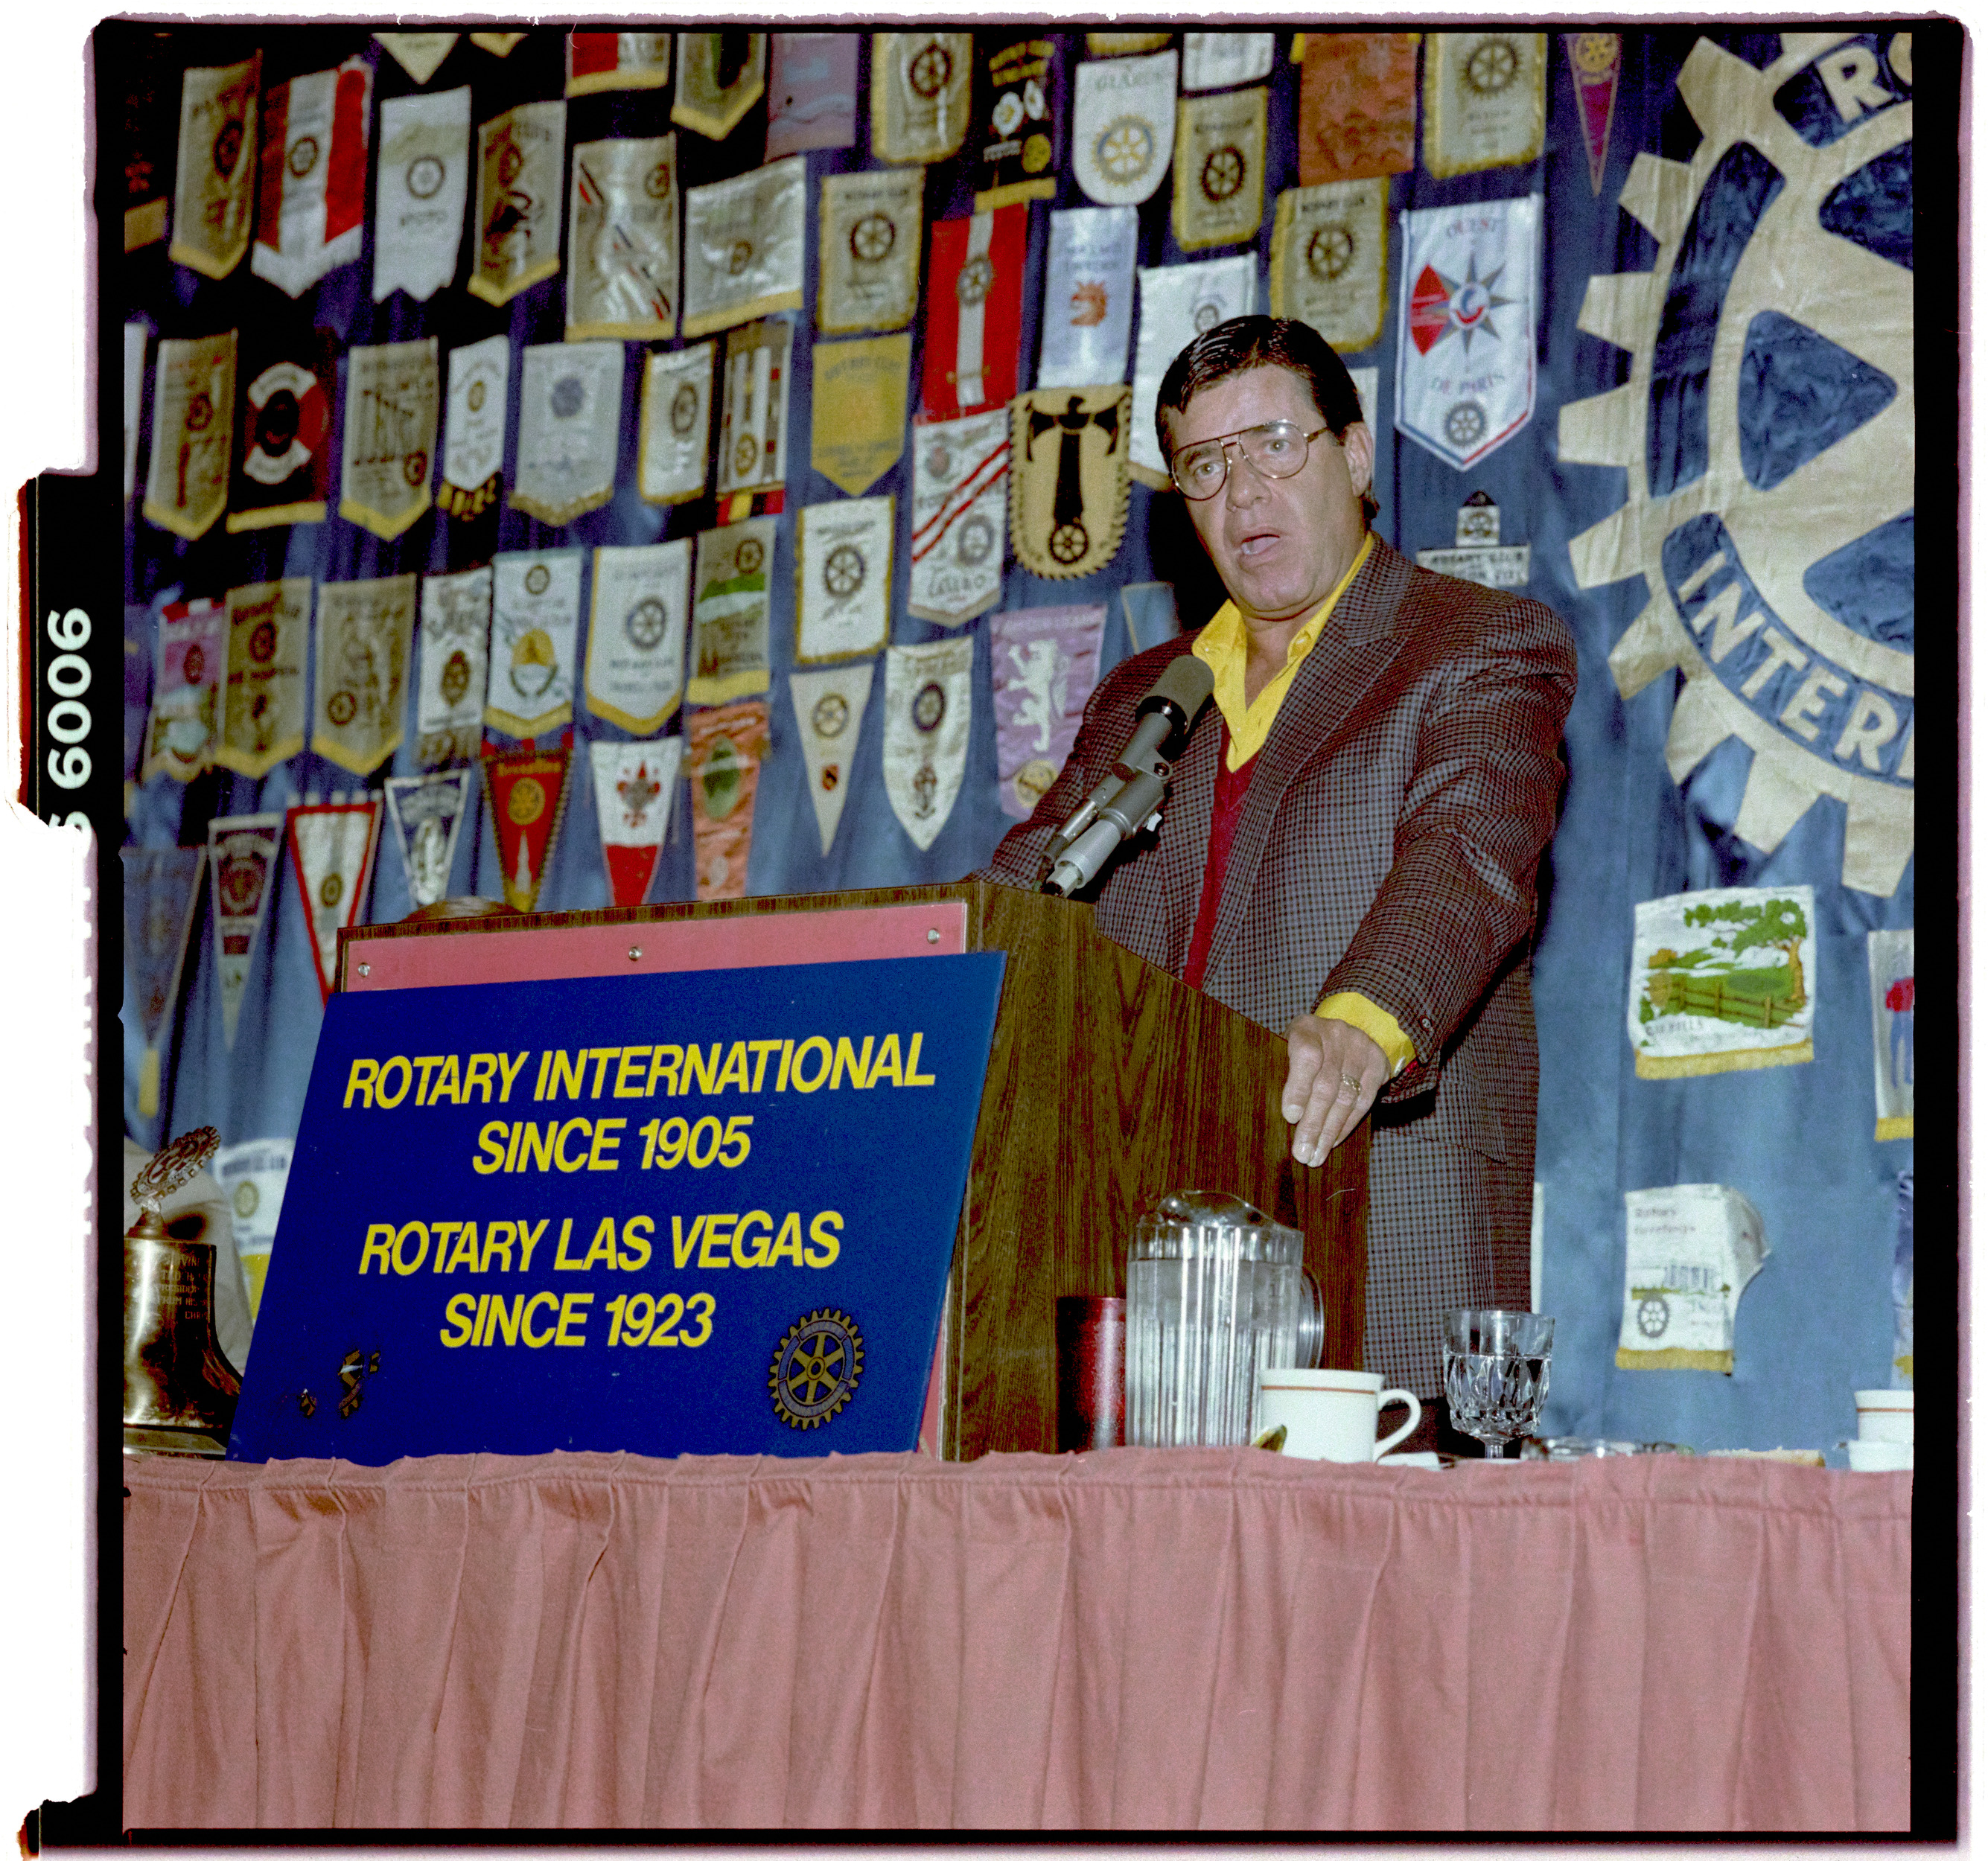 Photographs of Las Vegas Rotary Jerry Lewis, image 04